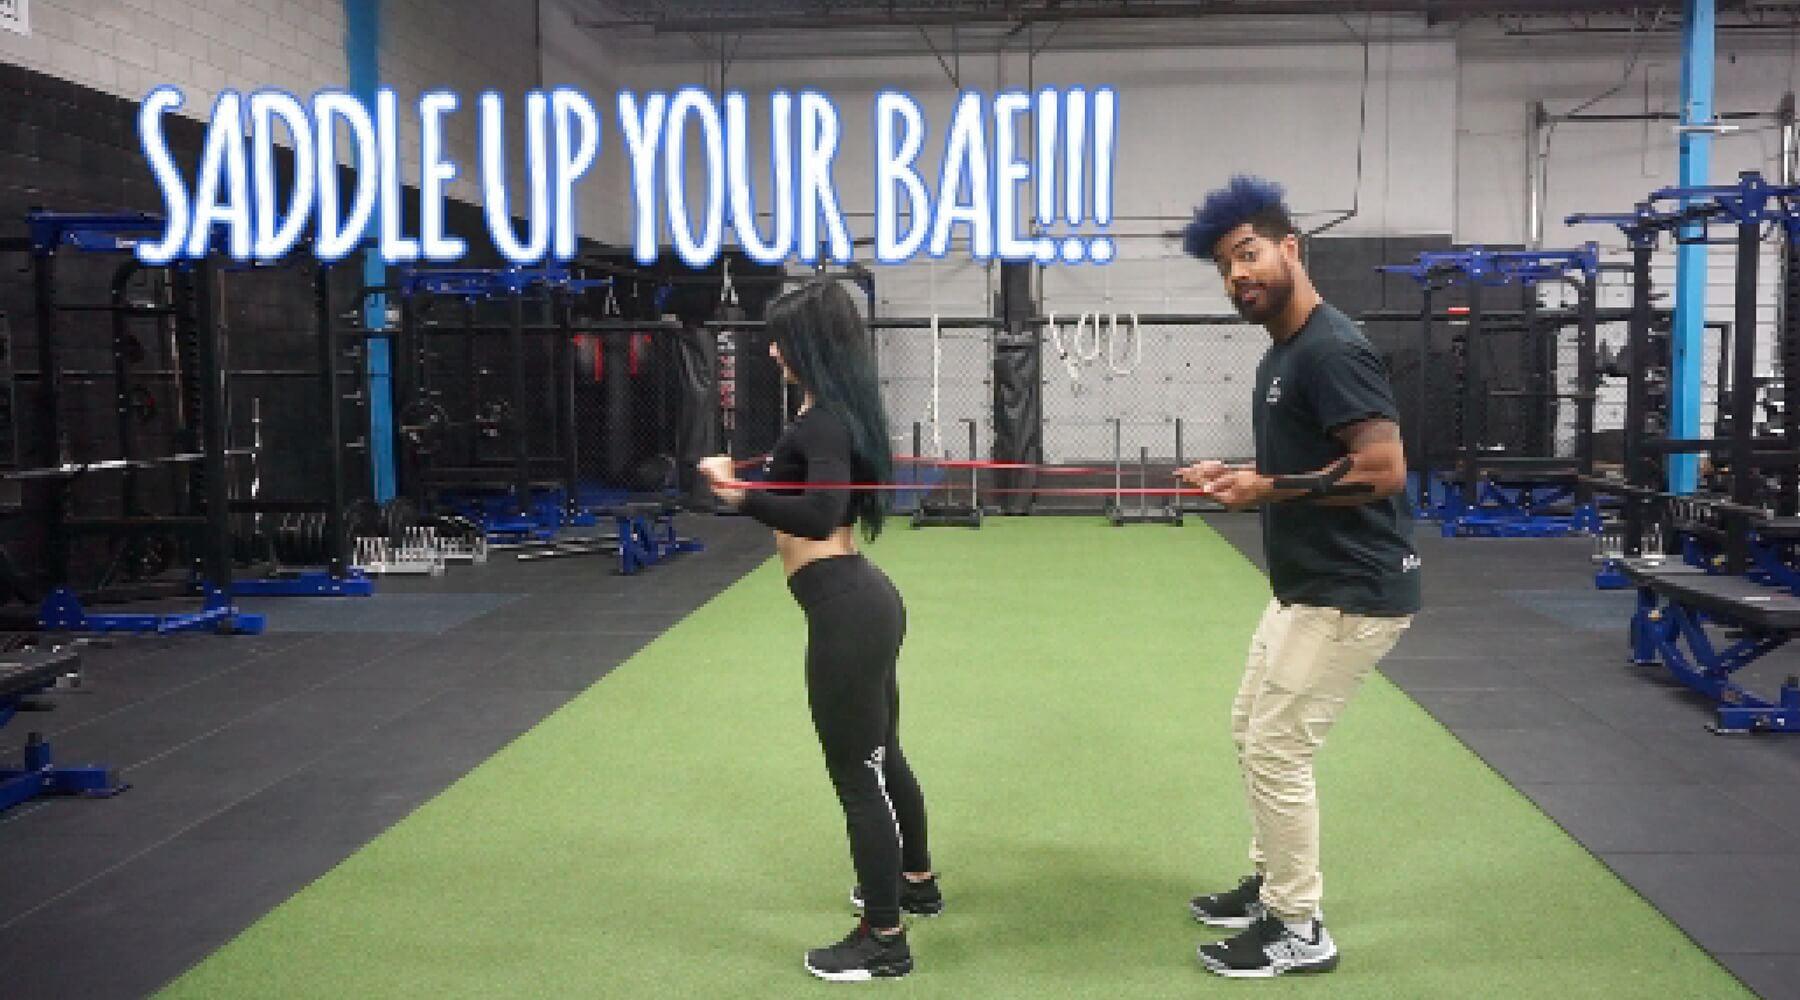 SADDLE UP your BAE for this PARTNER WORKOUT! - Forever Aesthetic Company